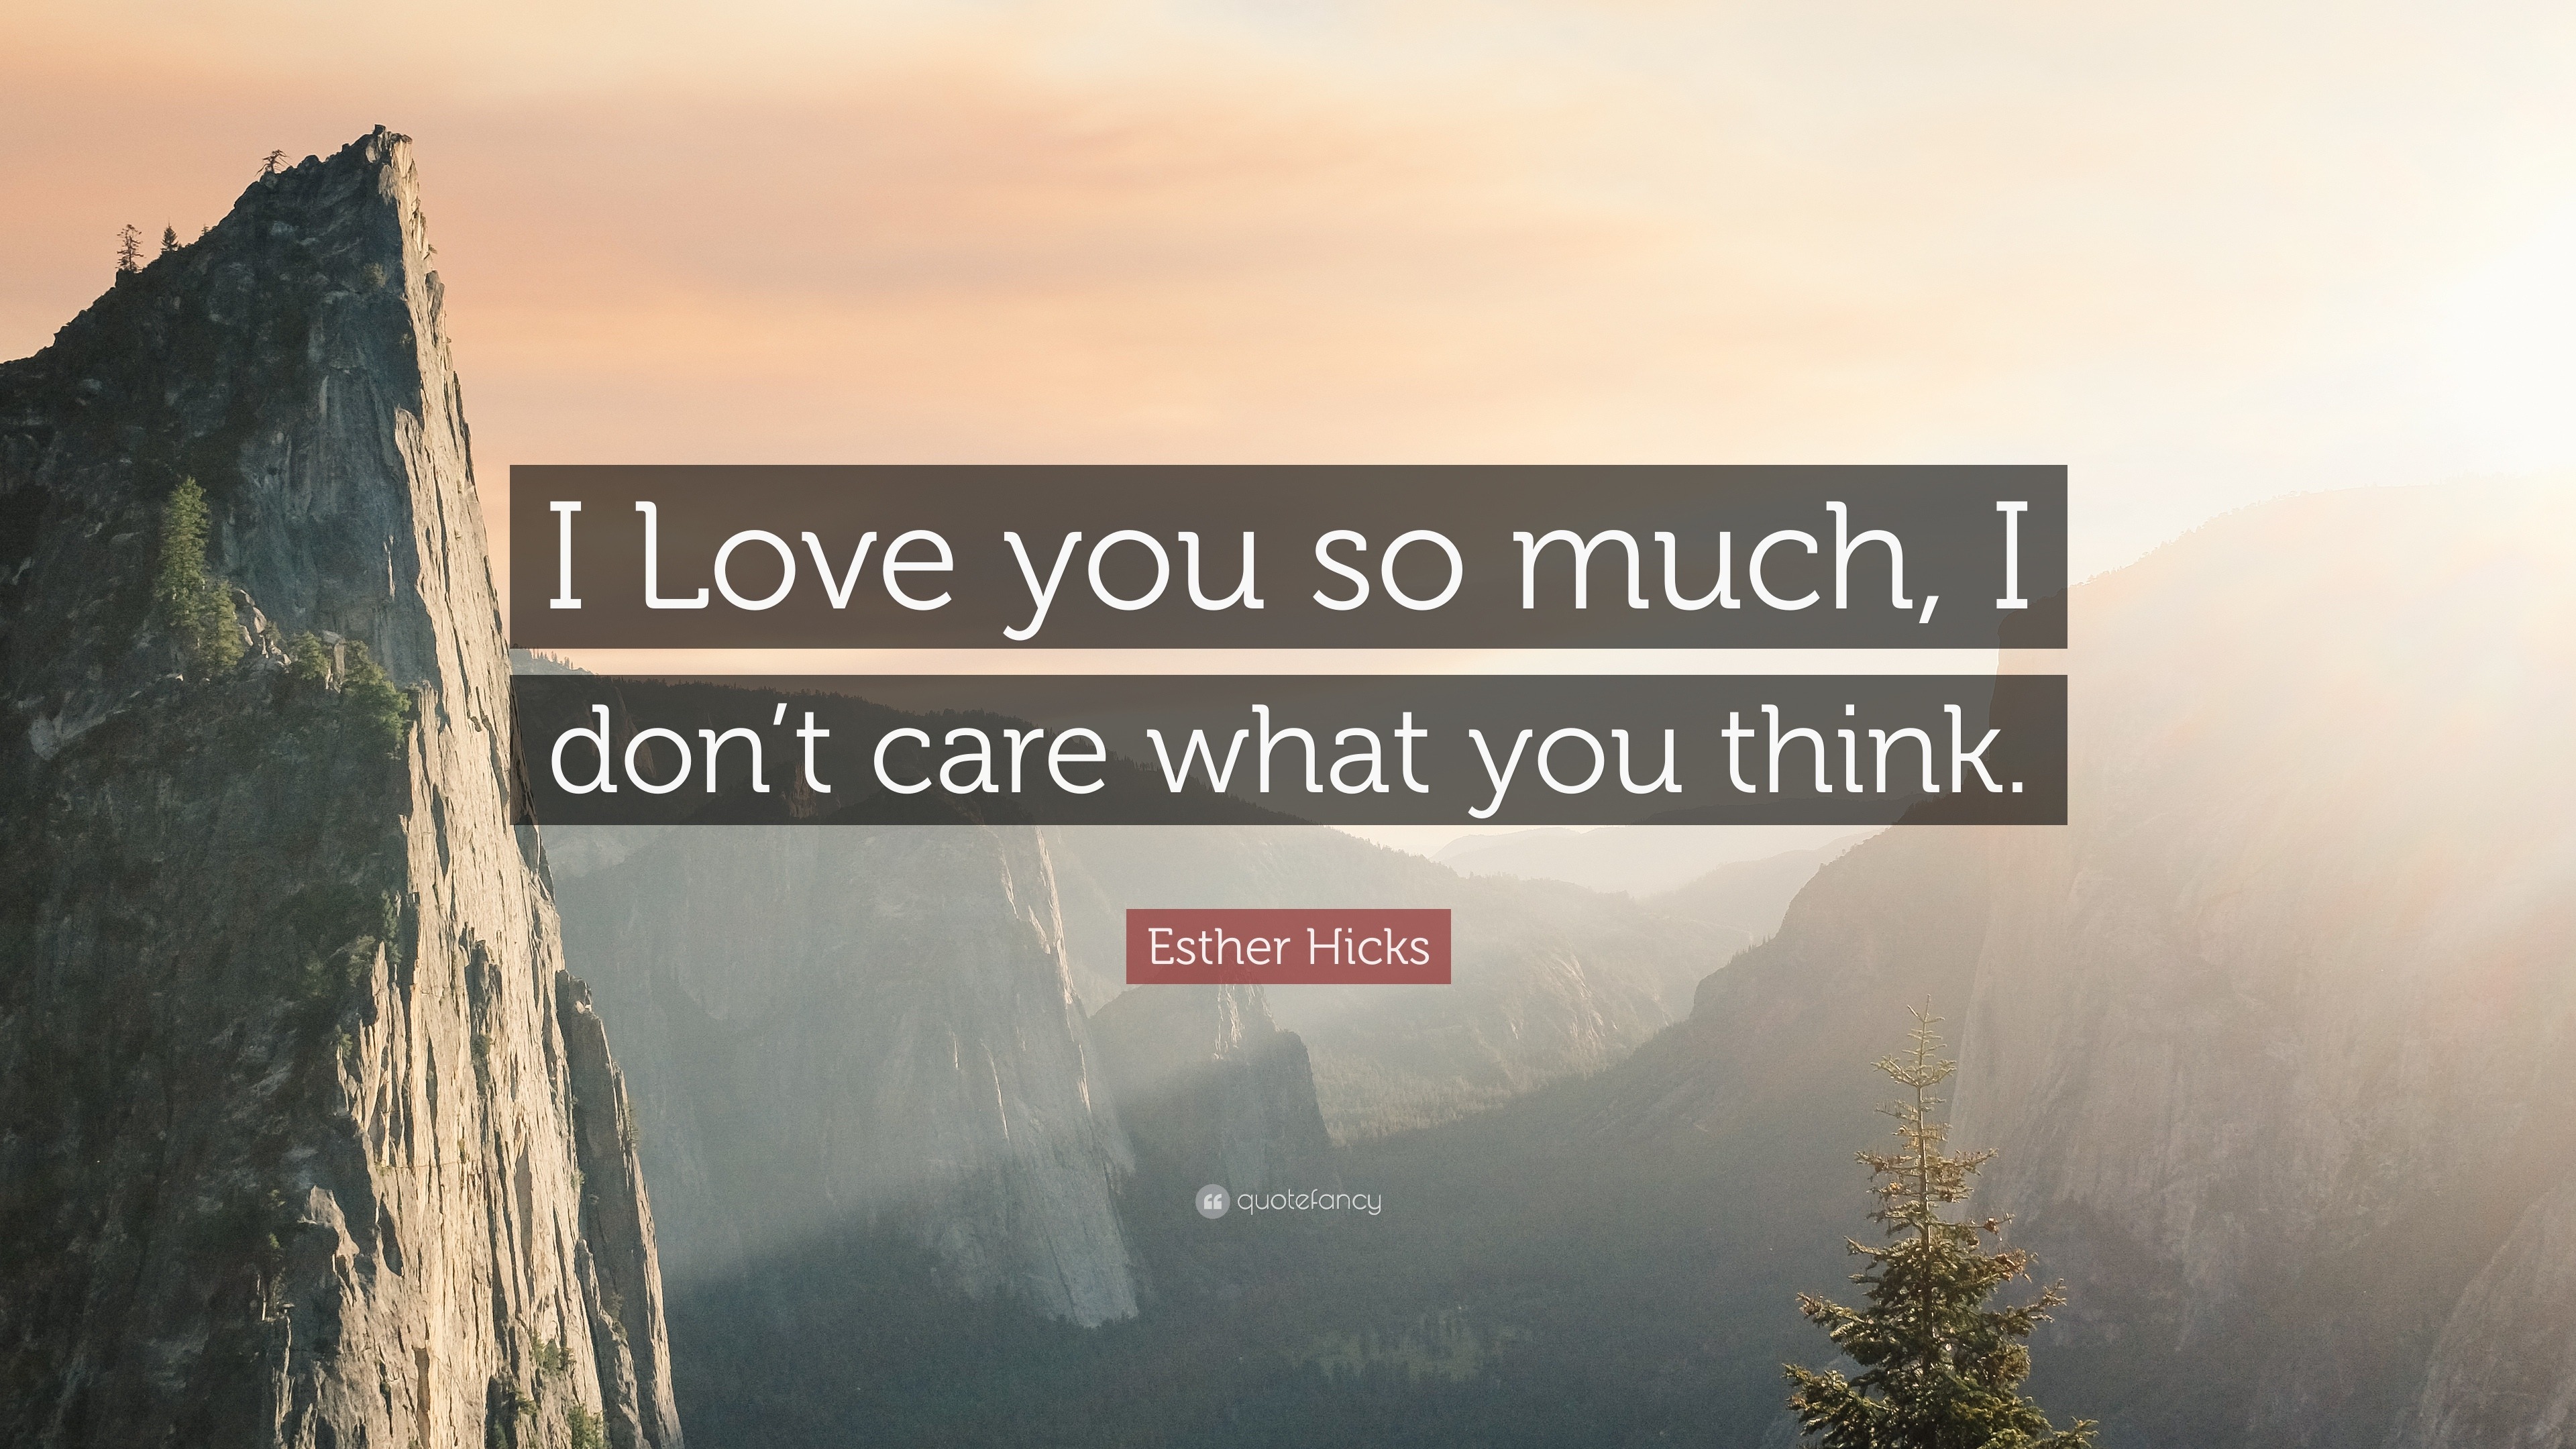 Esther Hicks Quote: “I Love you so much, I don’t care what ...